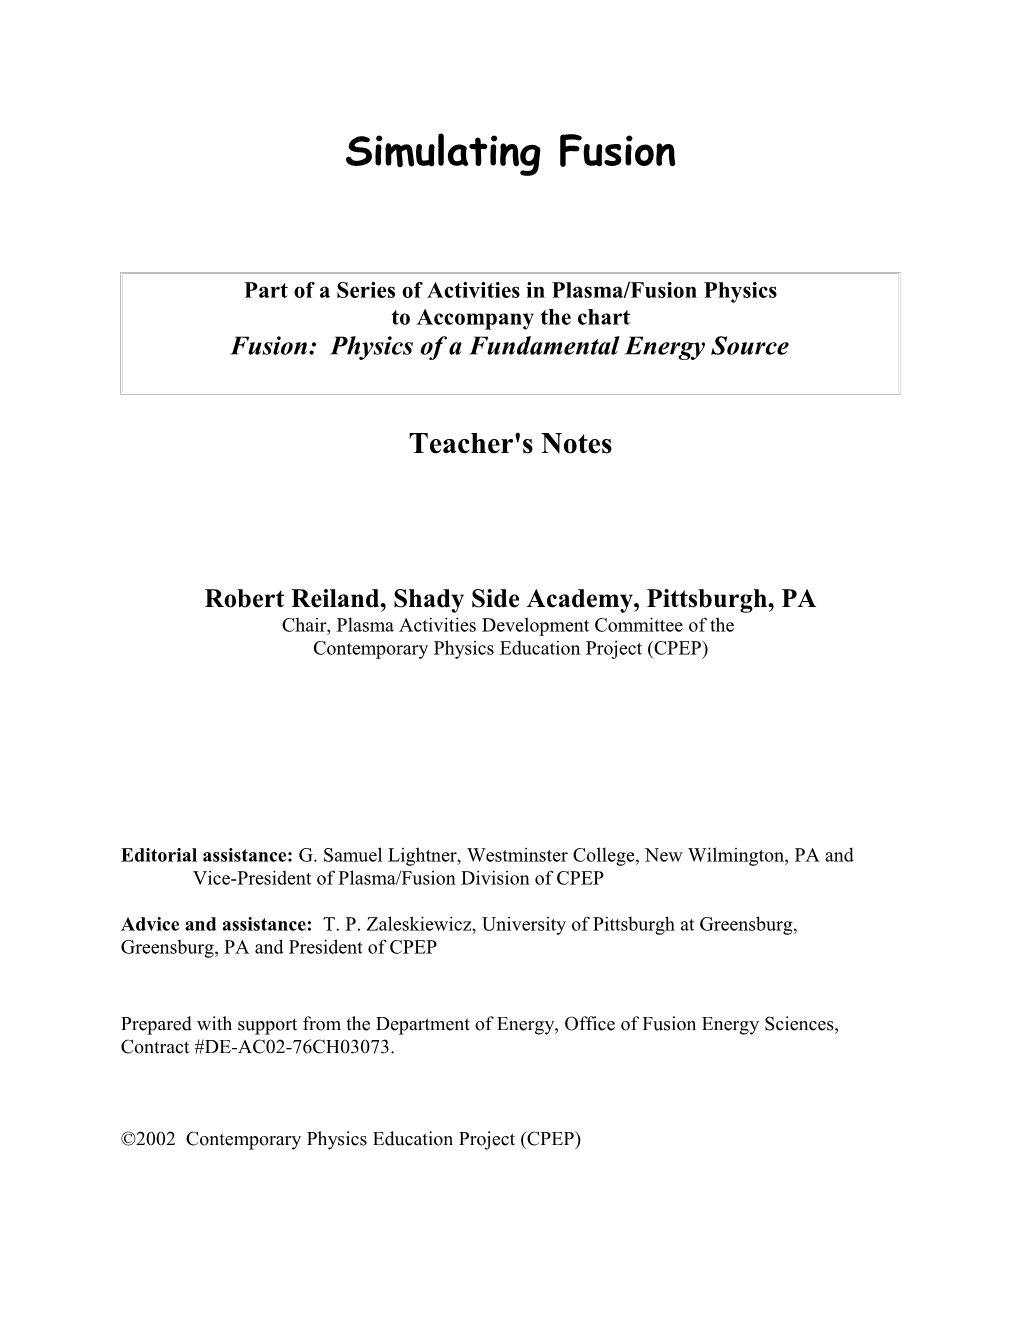 Part of a Series of Activities in Plasma/Fusion Physics